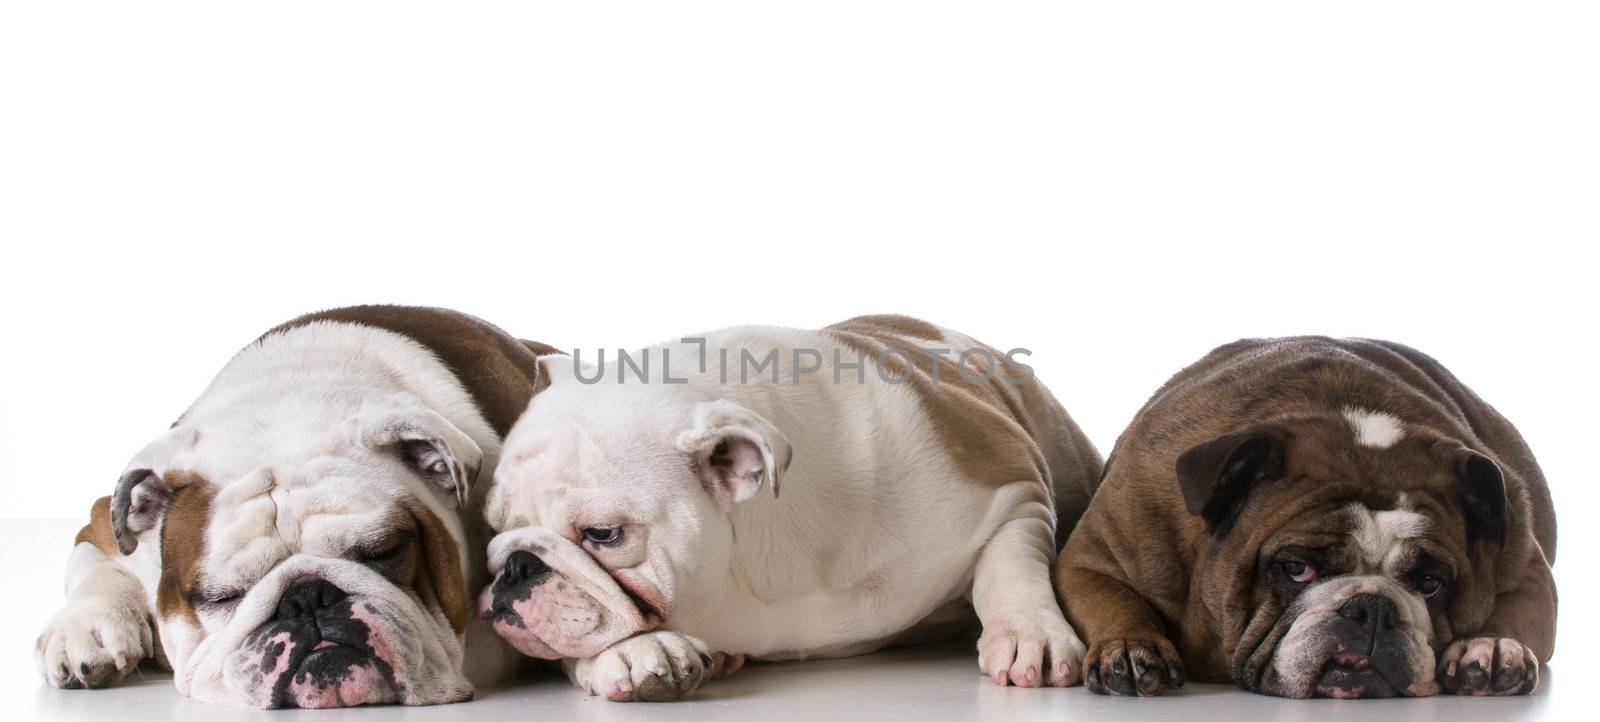 three generations of bulldogs - father, son and grandmother